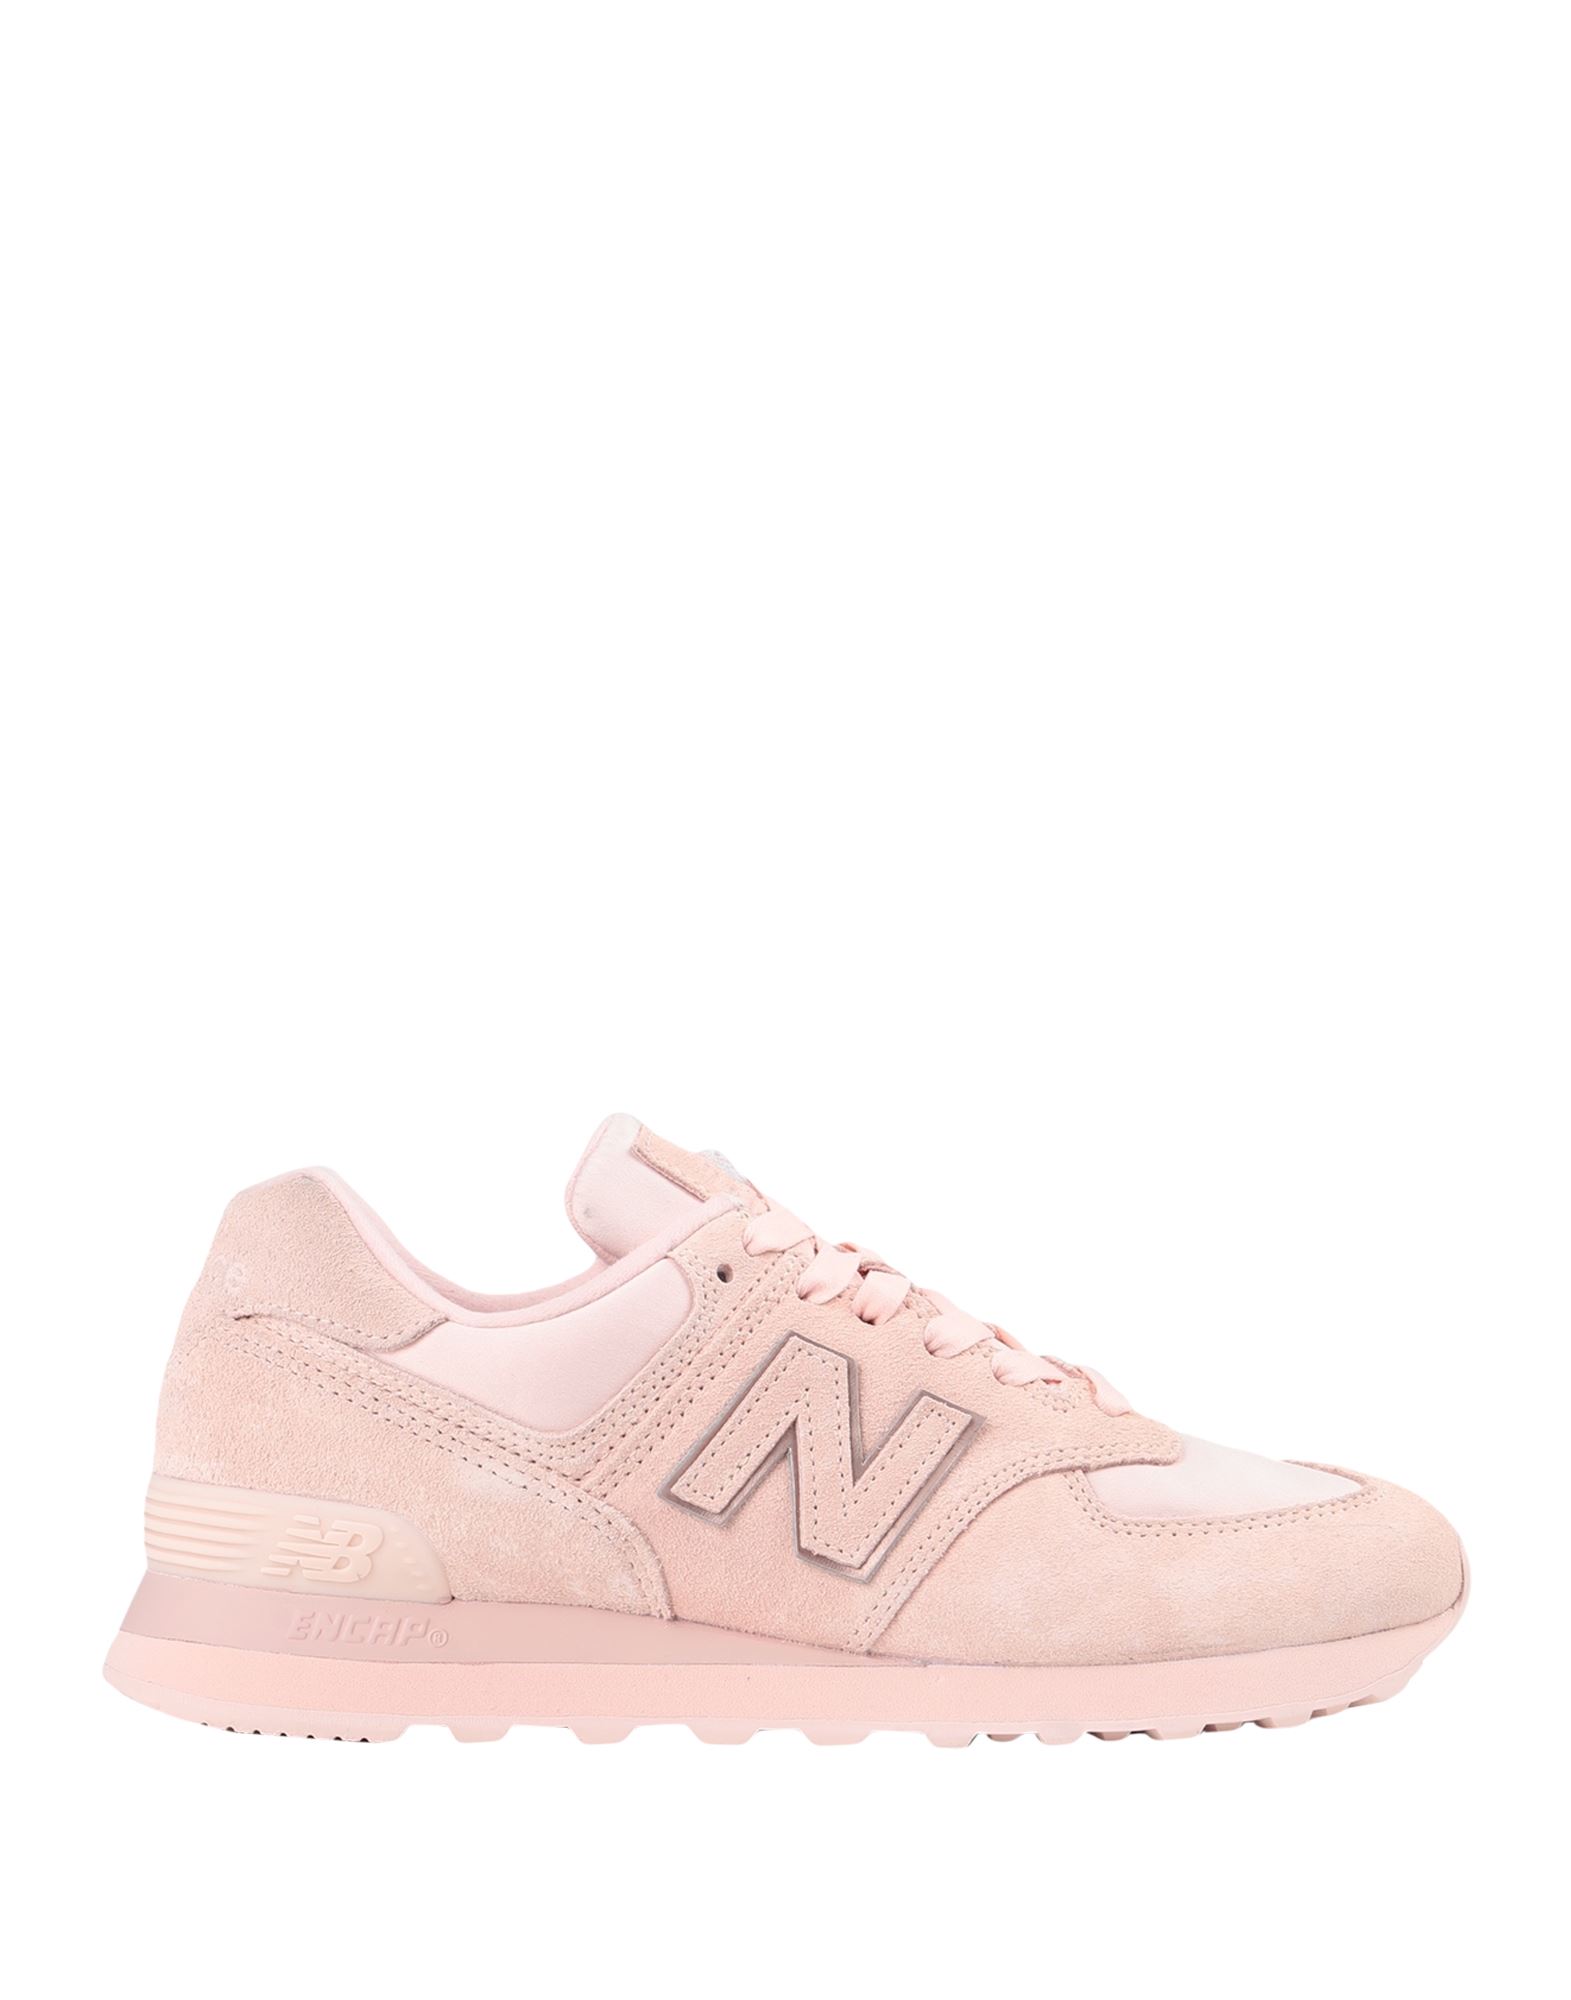 New Balance Sneakers In Light Pink | ModeSens